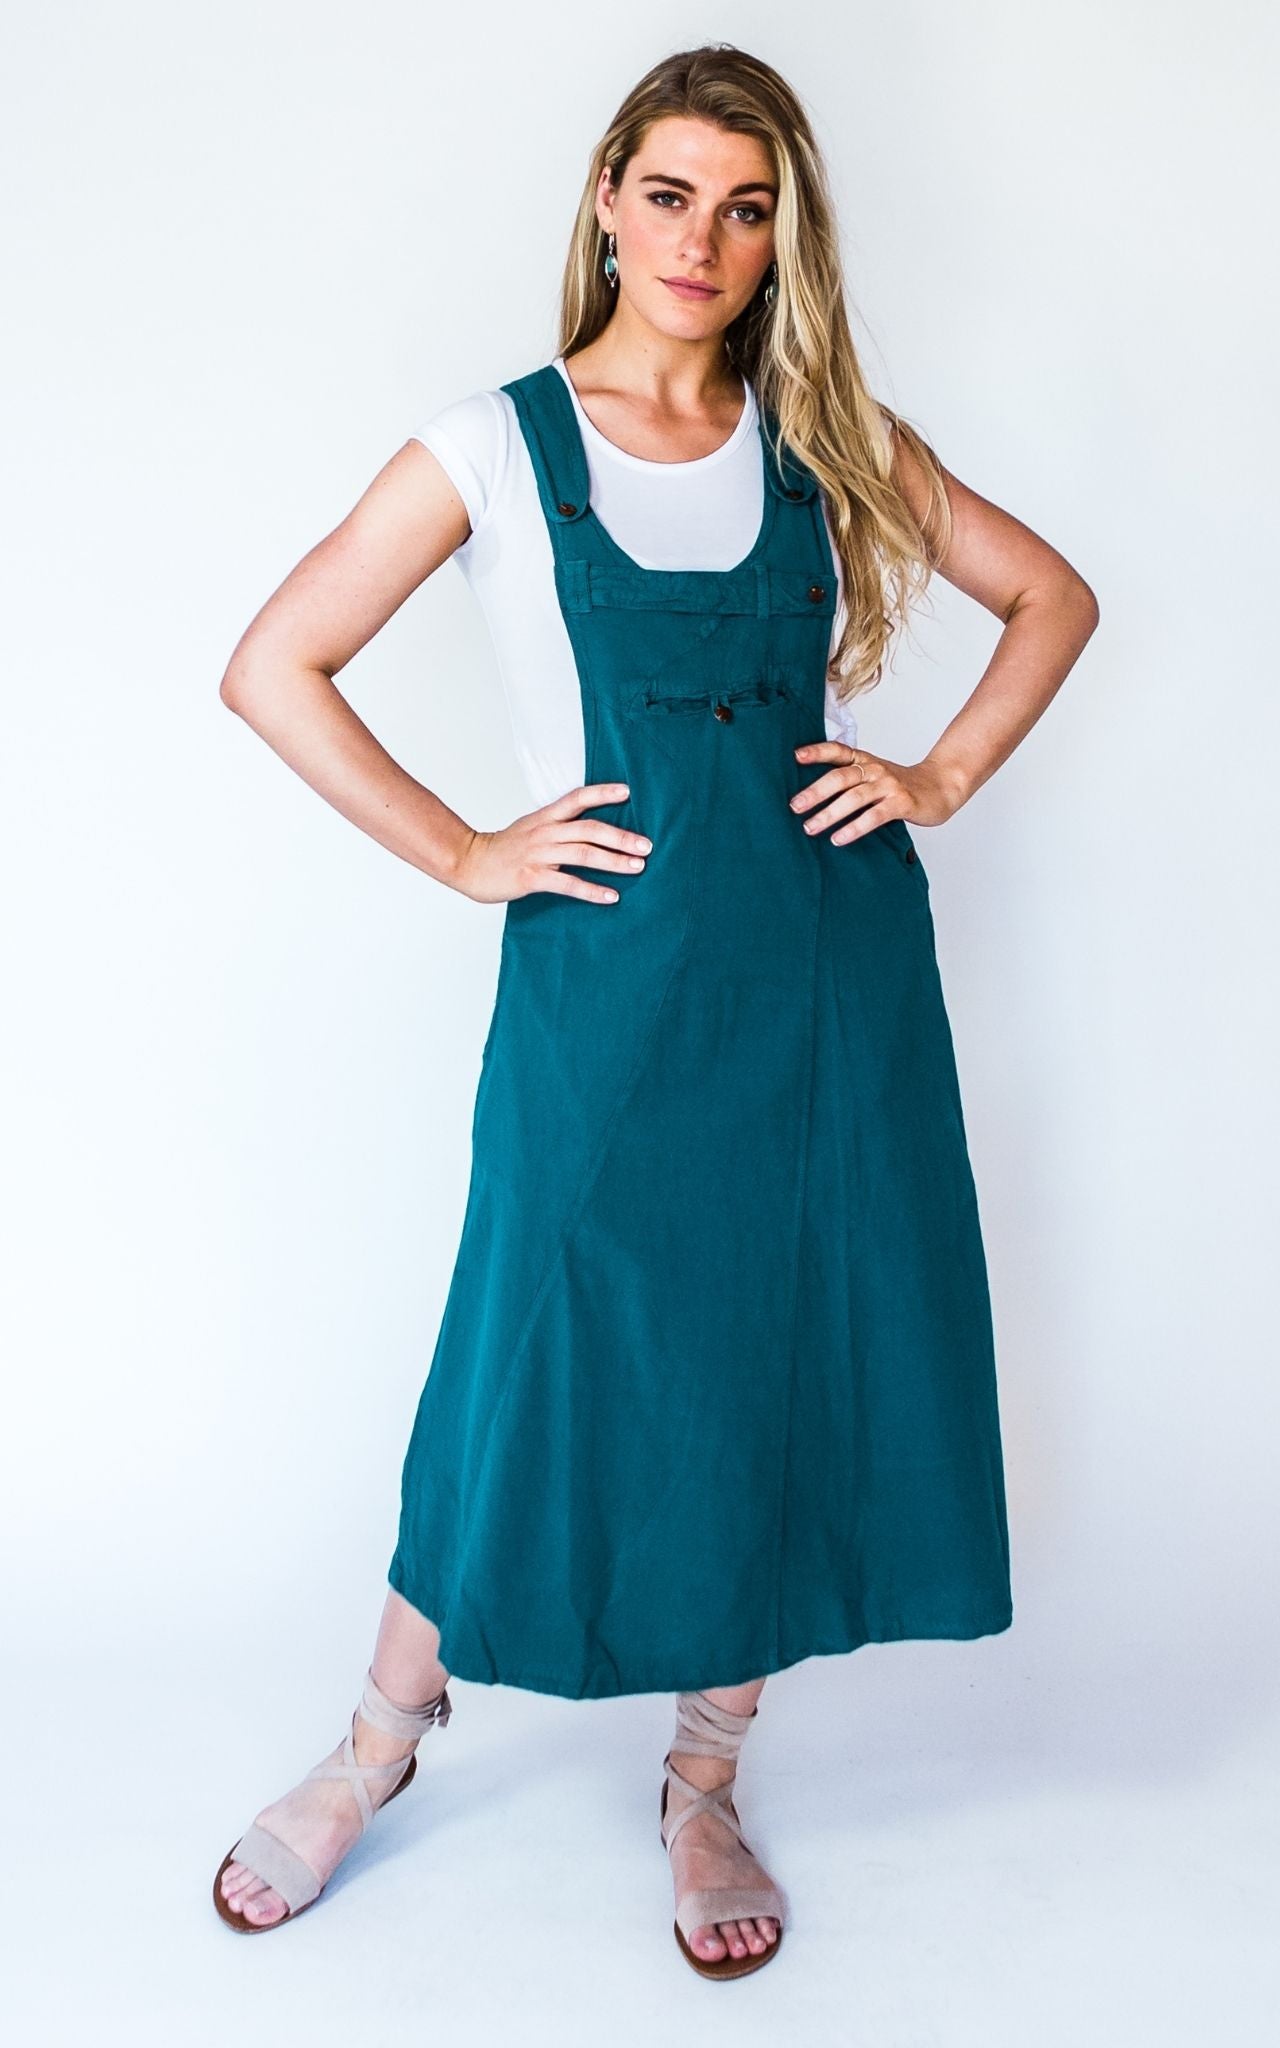 Cotton Dungaree Dress | Ethically made in Nepal – Surya